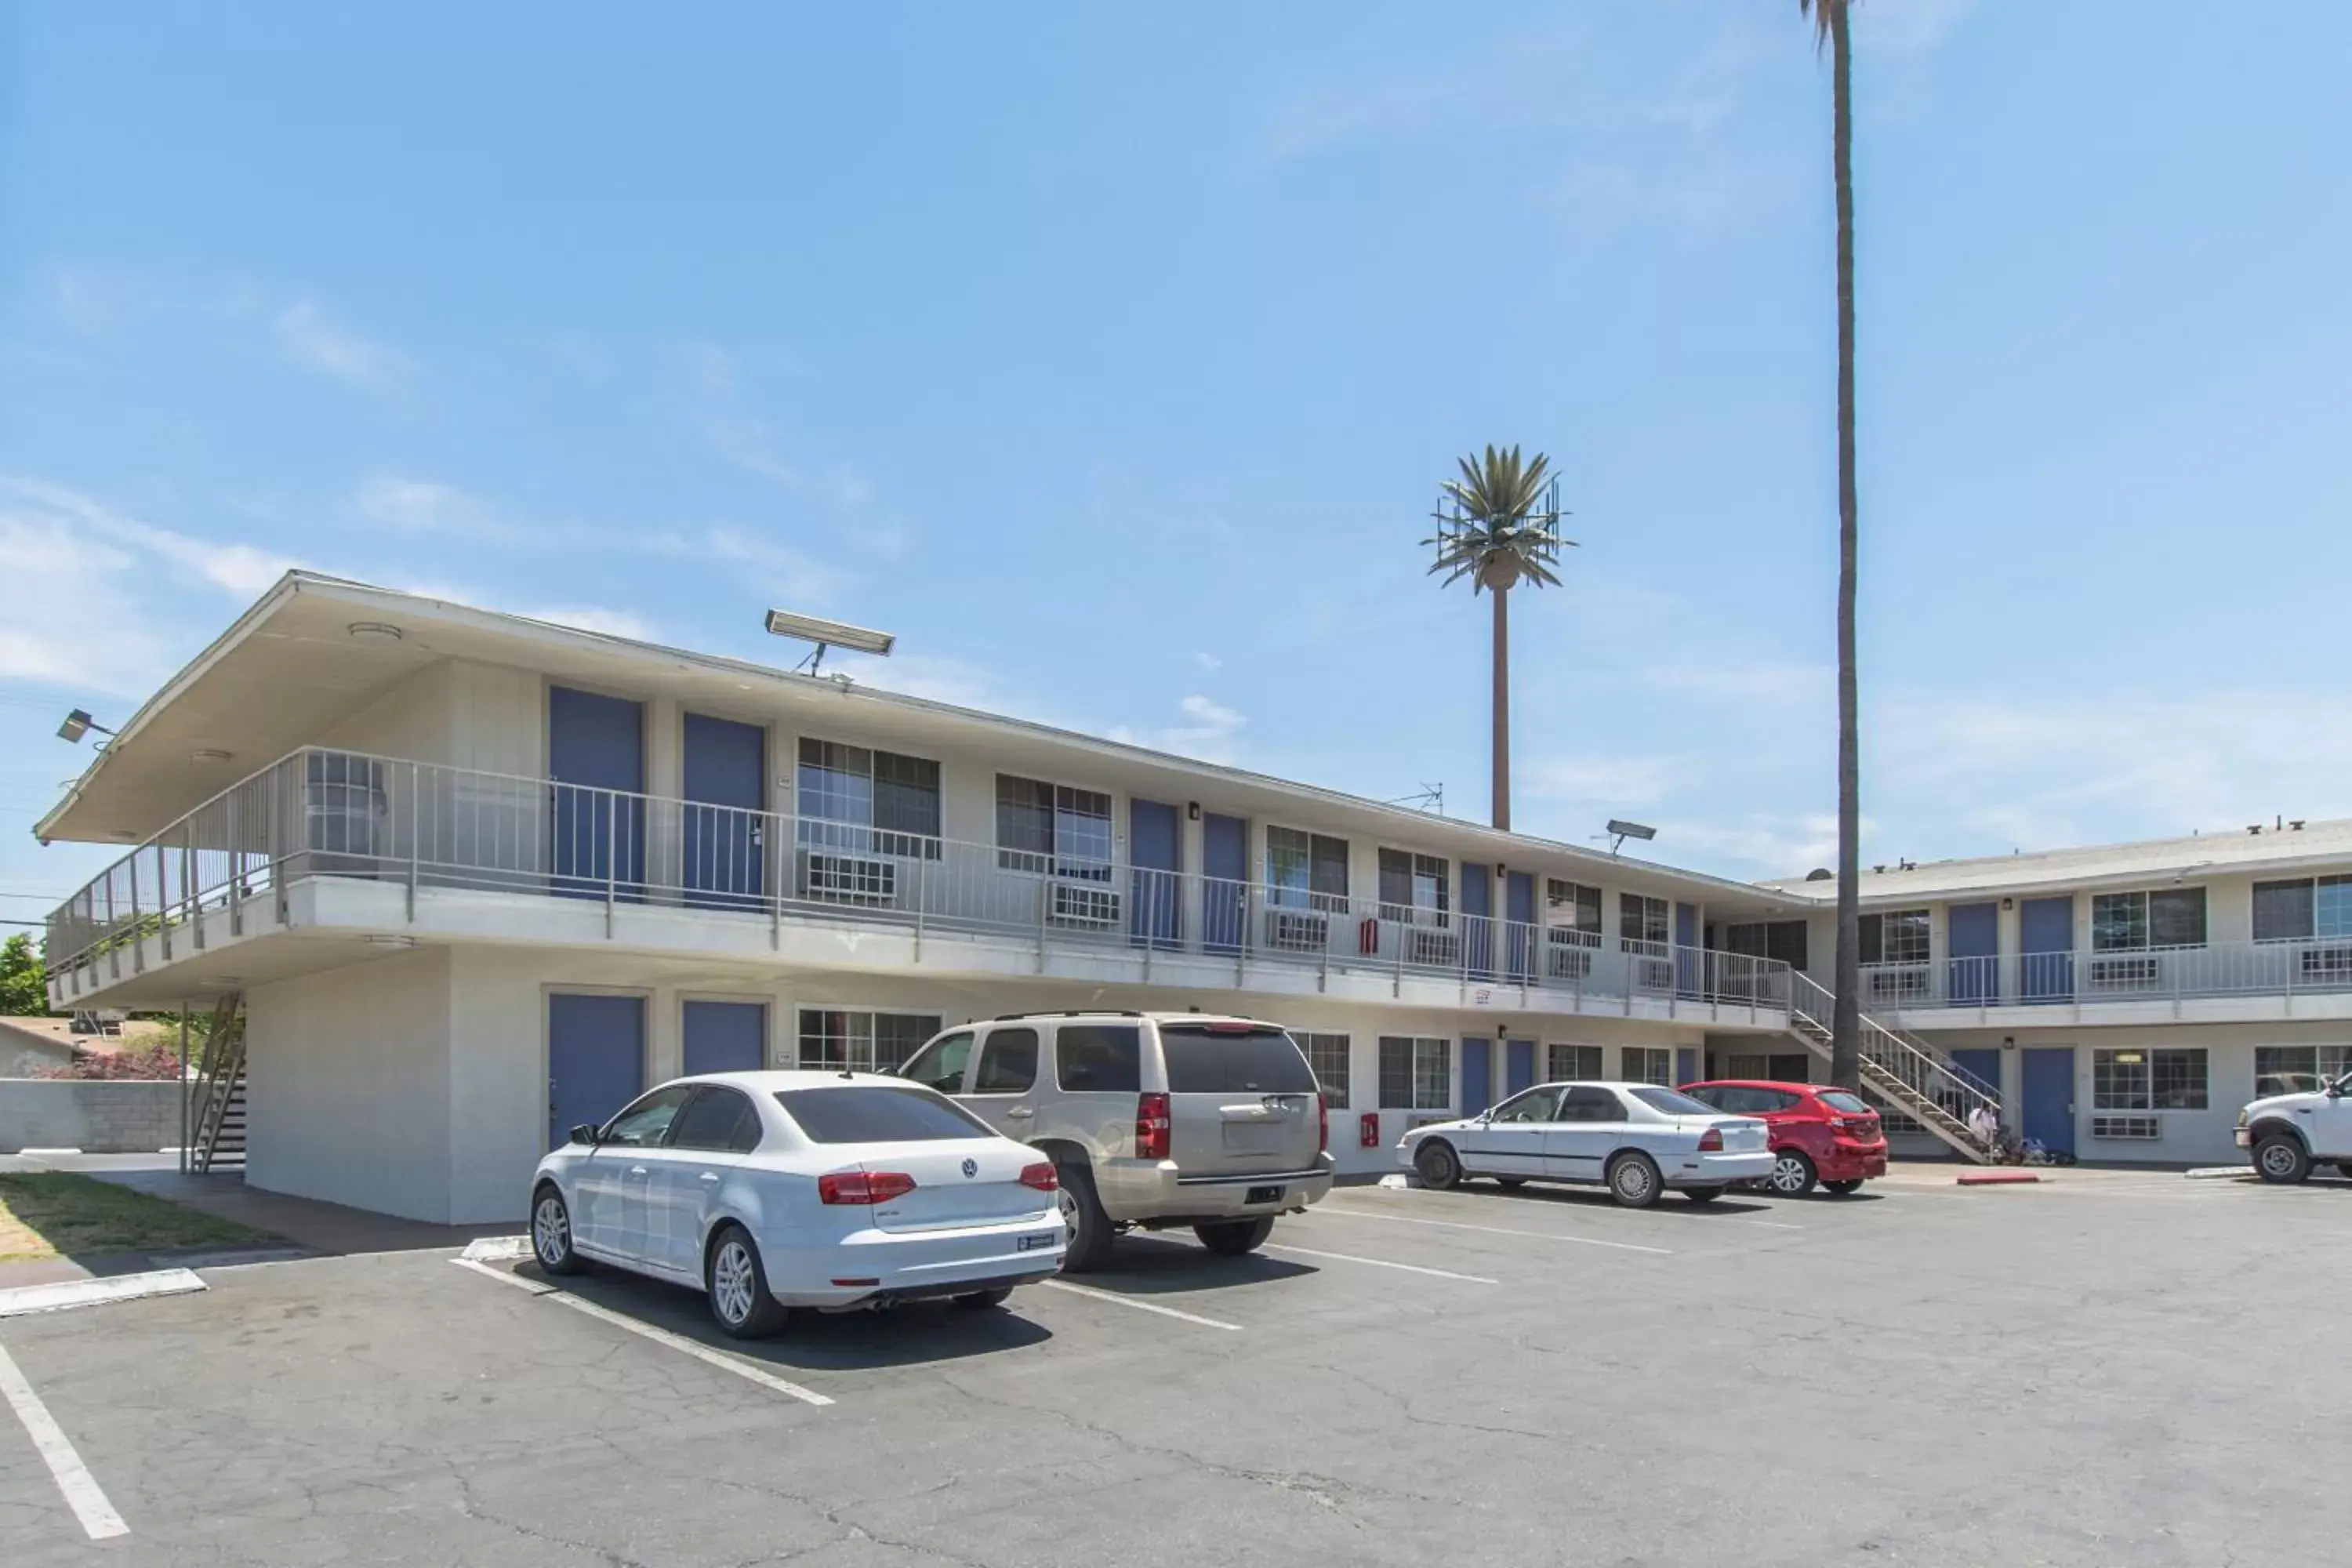 On site, Property Building in Motel 6 Bakersfield, CA - Central